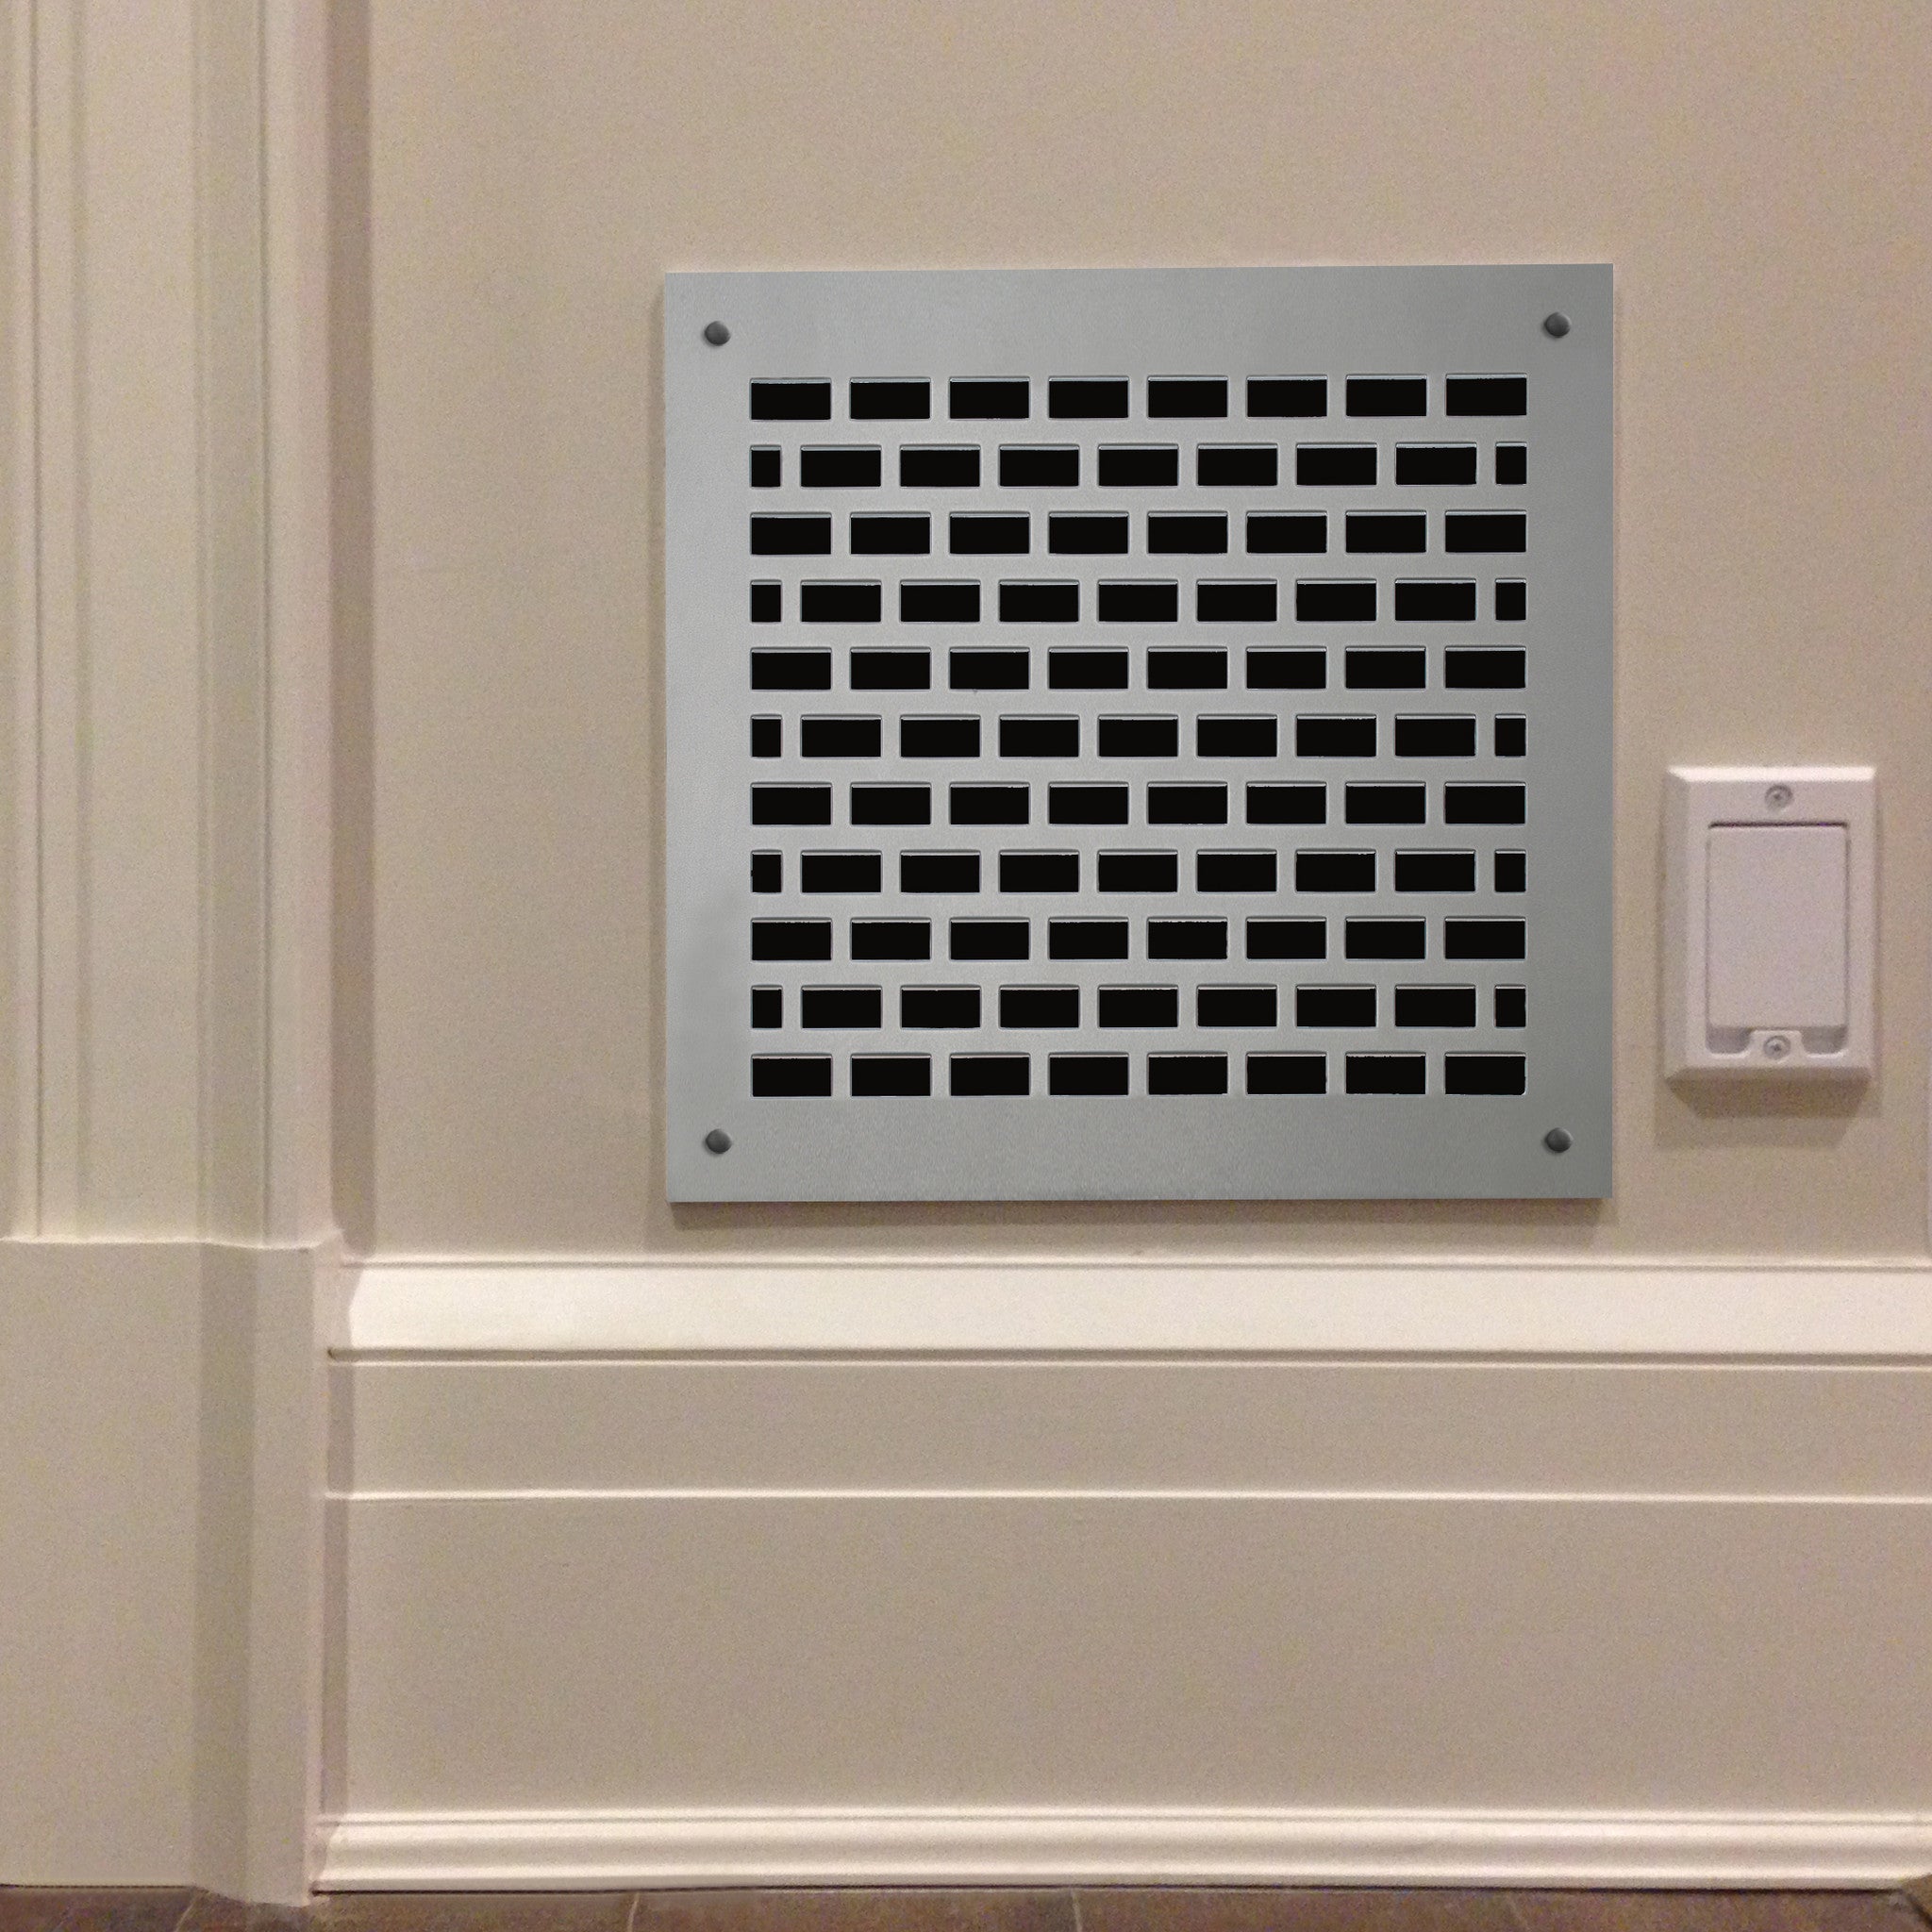 215 Brick Perforated Grille: 3/8” x 1” pattern - 43% Open